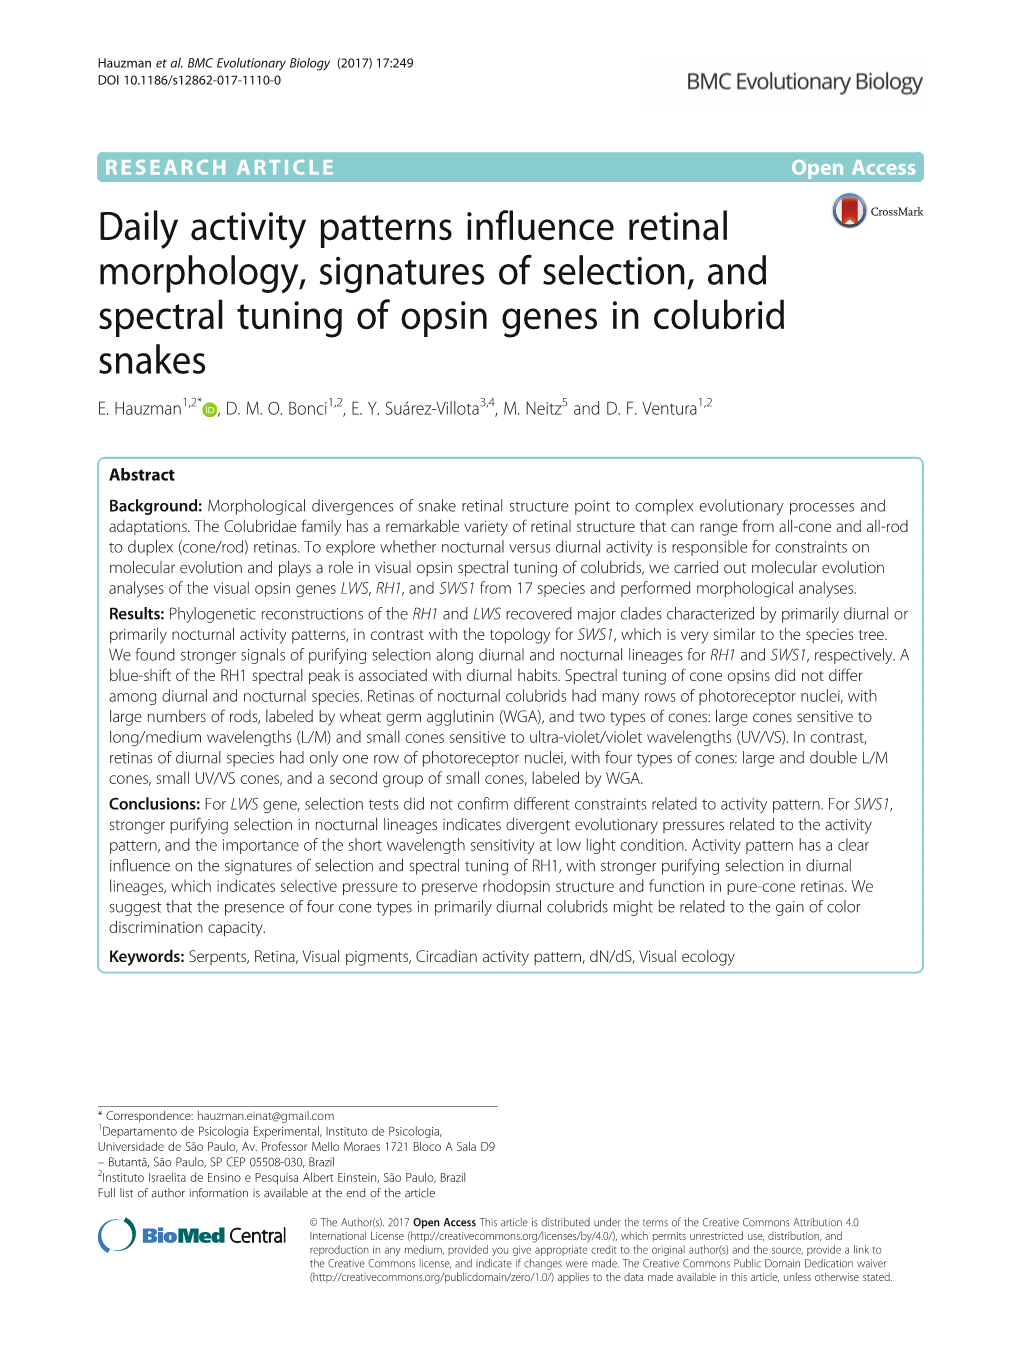 Daily Activity Patterns Influence Retinal Morphology, Signatures of Selection, and Spectral Tuning of Opsin Genes in Colubrid Snakes E